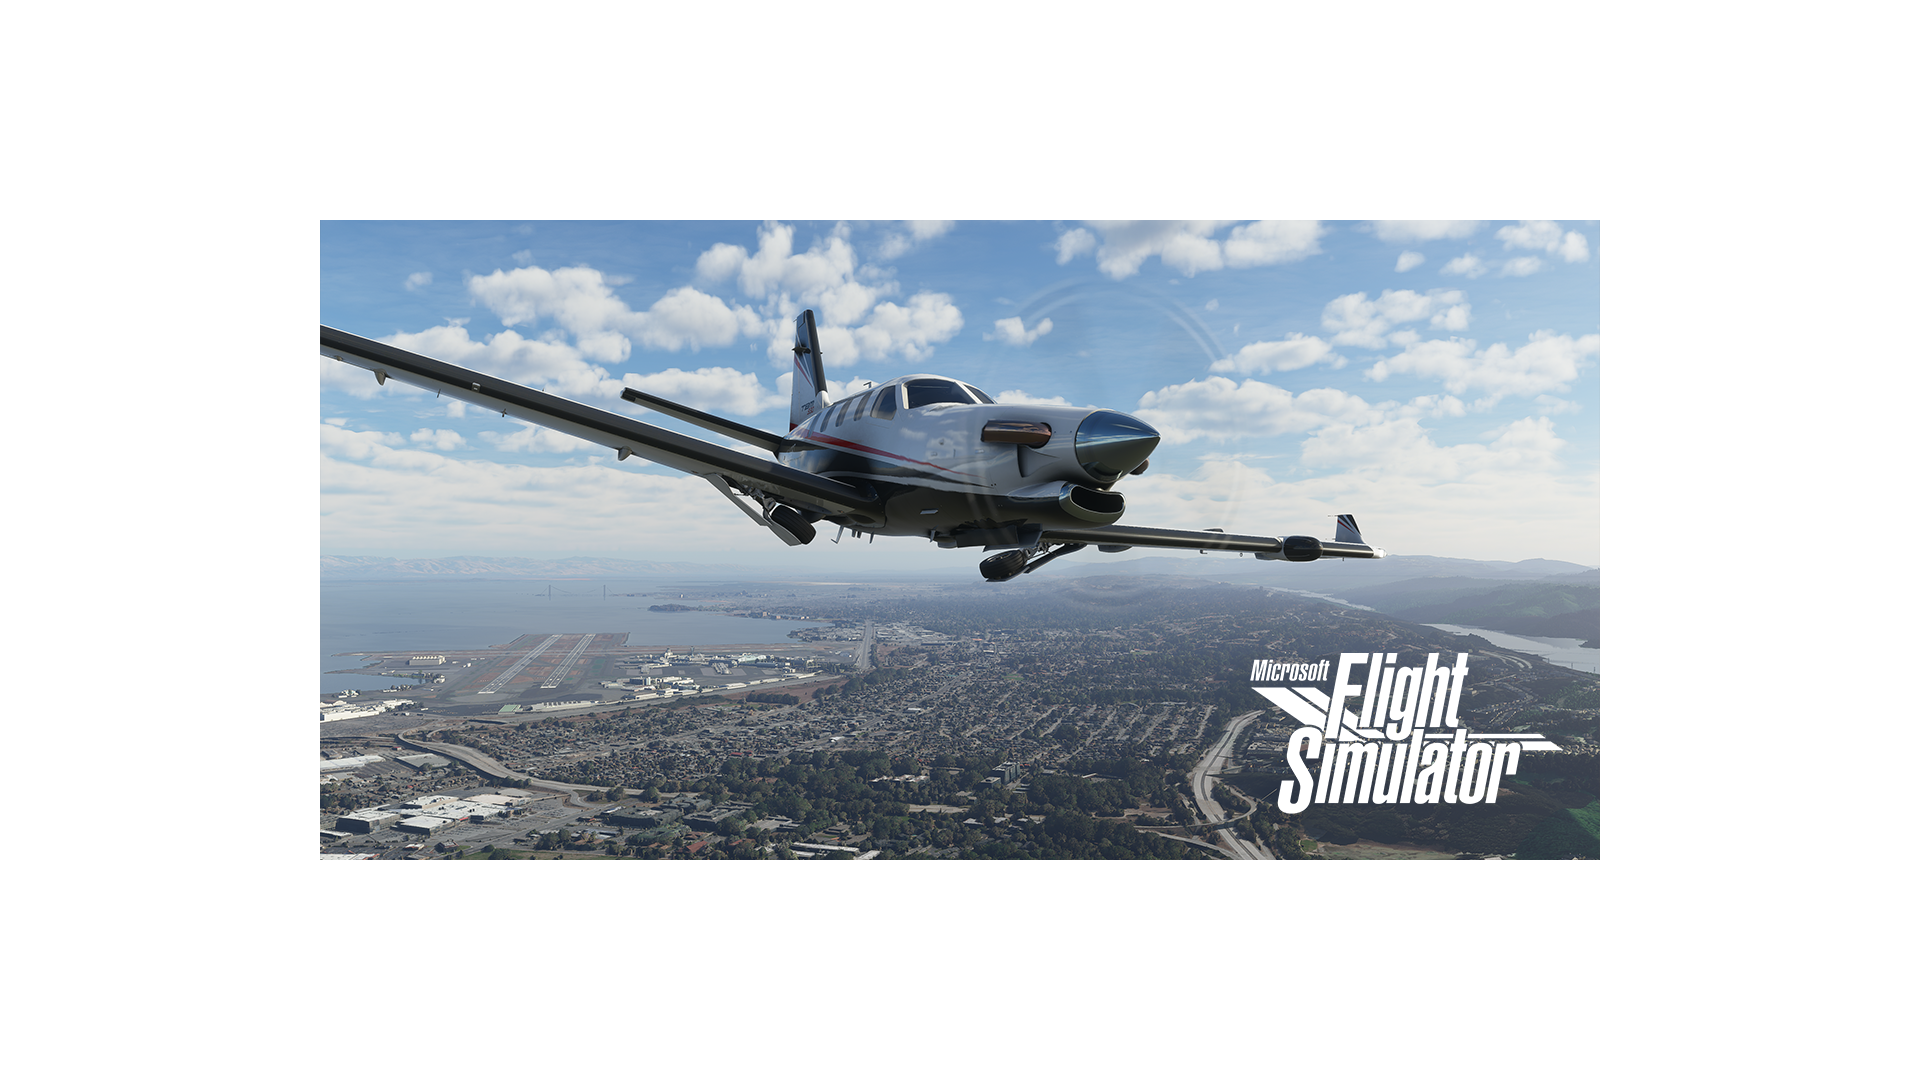 Microsoft Flight Simulator Game of the Year Edition (hope qzeq sees this)